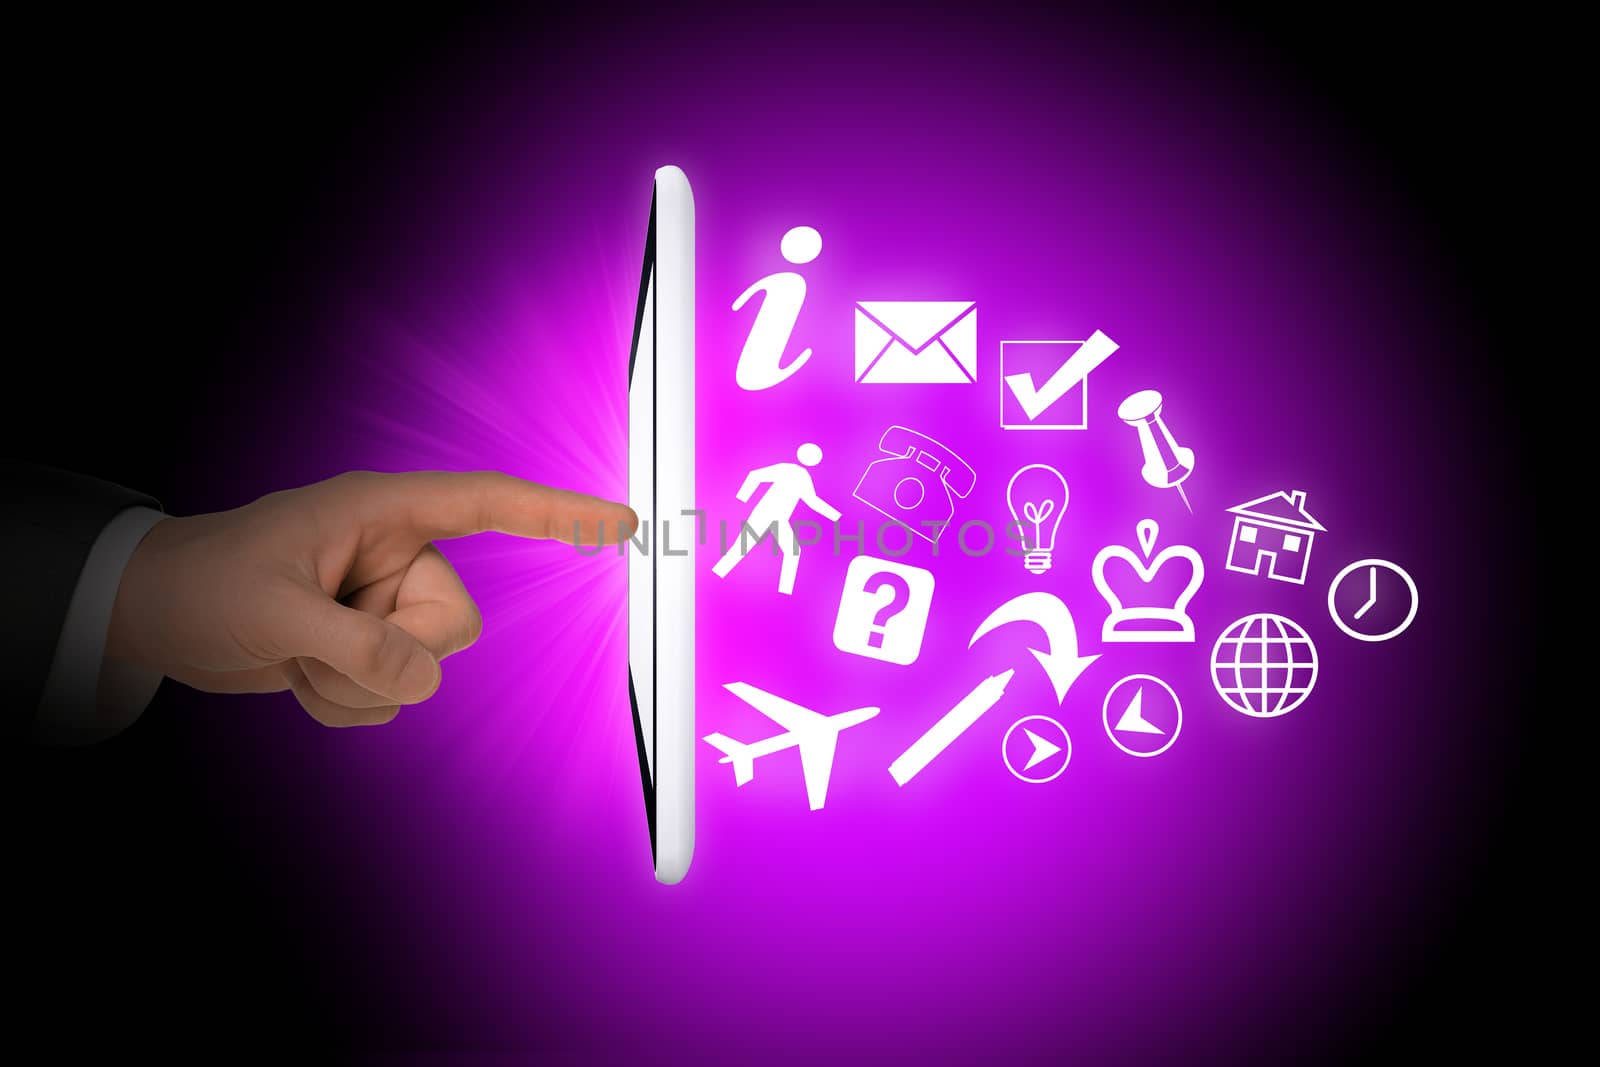 Humans hands and tablet with icons on abstract purple background